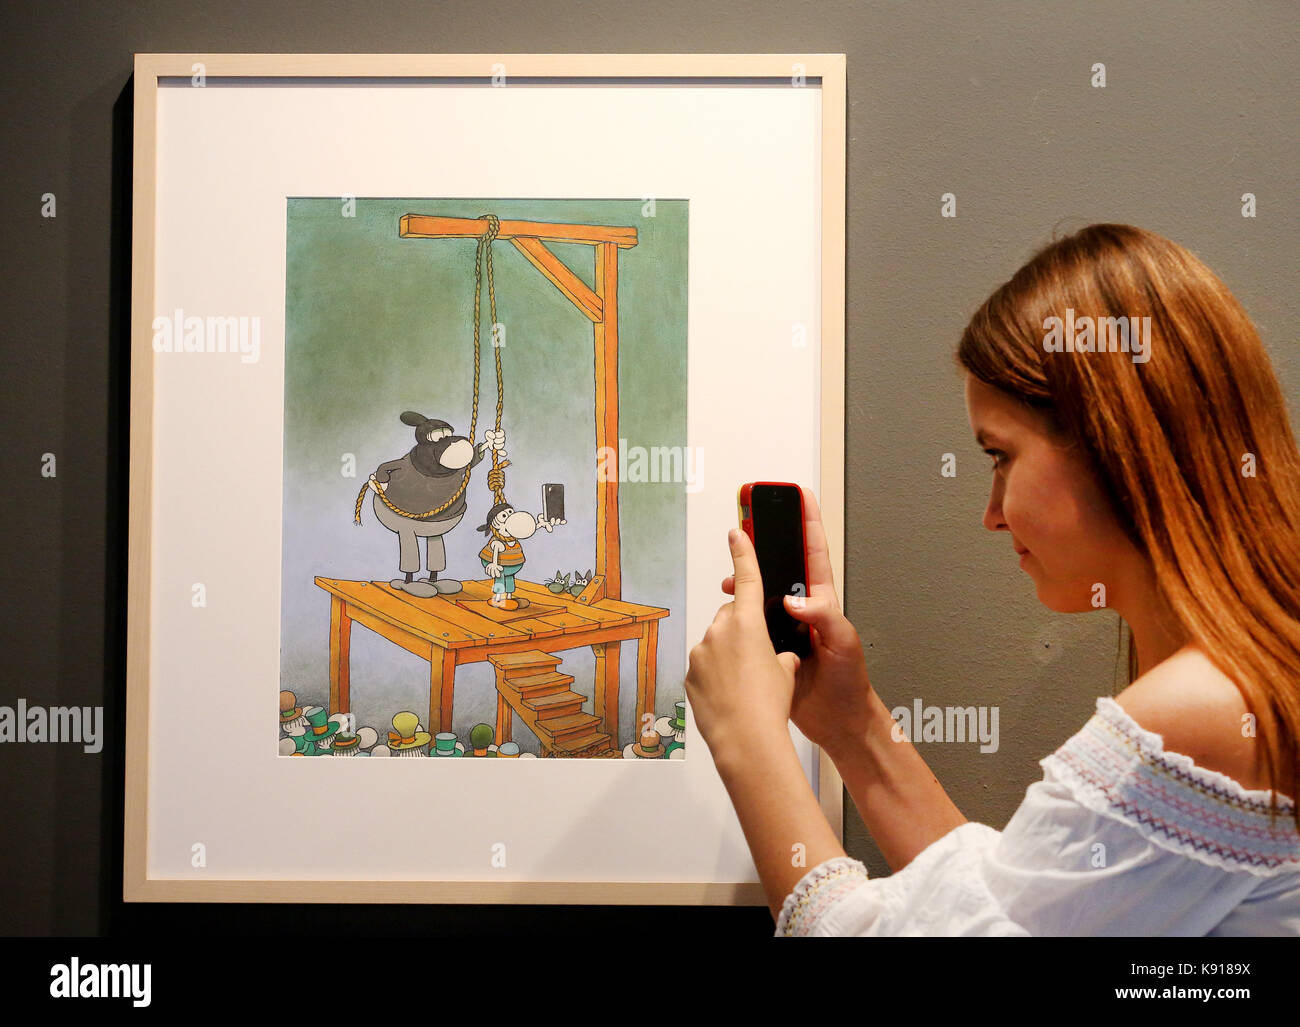 Oberhausen, Germany. 21st Sep, 2017. A woman takes a picture of an untitled comic illustration (Majorca 2015) by Guillermo Mordillo pictured at the Ludwig Gallerie Schloss Oberhausen in Oberhausen, Germany, 21 September 2017. The Ludwiggalerie is showing more than 150 originals and prints to mark the artist's 85th birthday, from 24 September 2017 to 07 January 2018. Credit: Roland Weihrauch/dpa/Alamy Live News Stock Photo